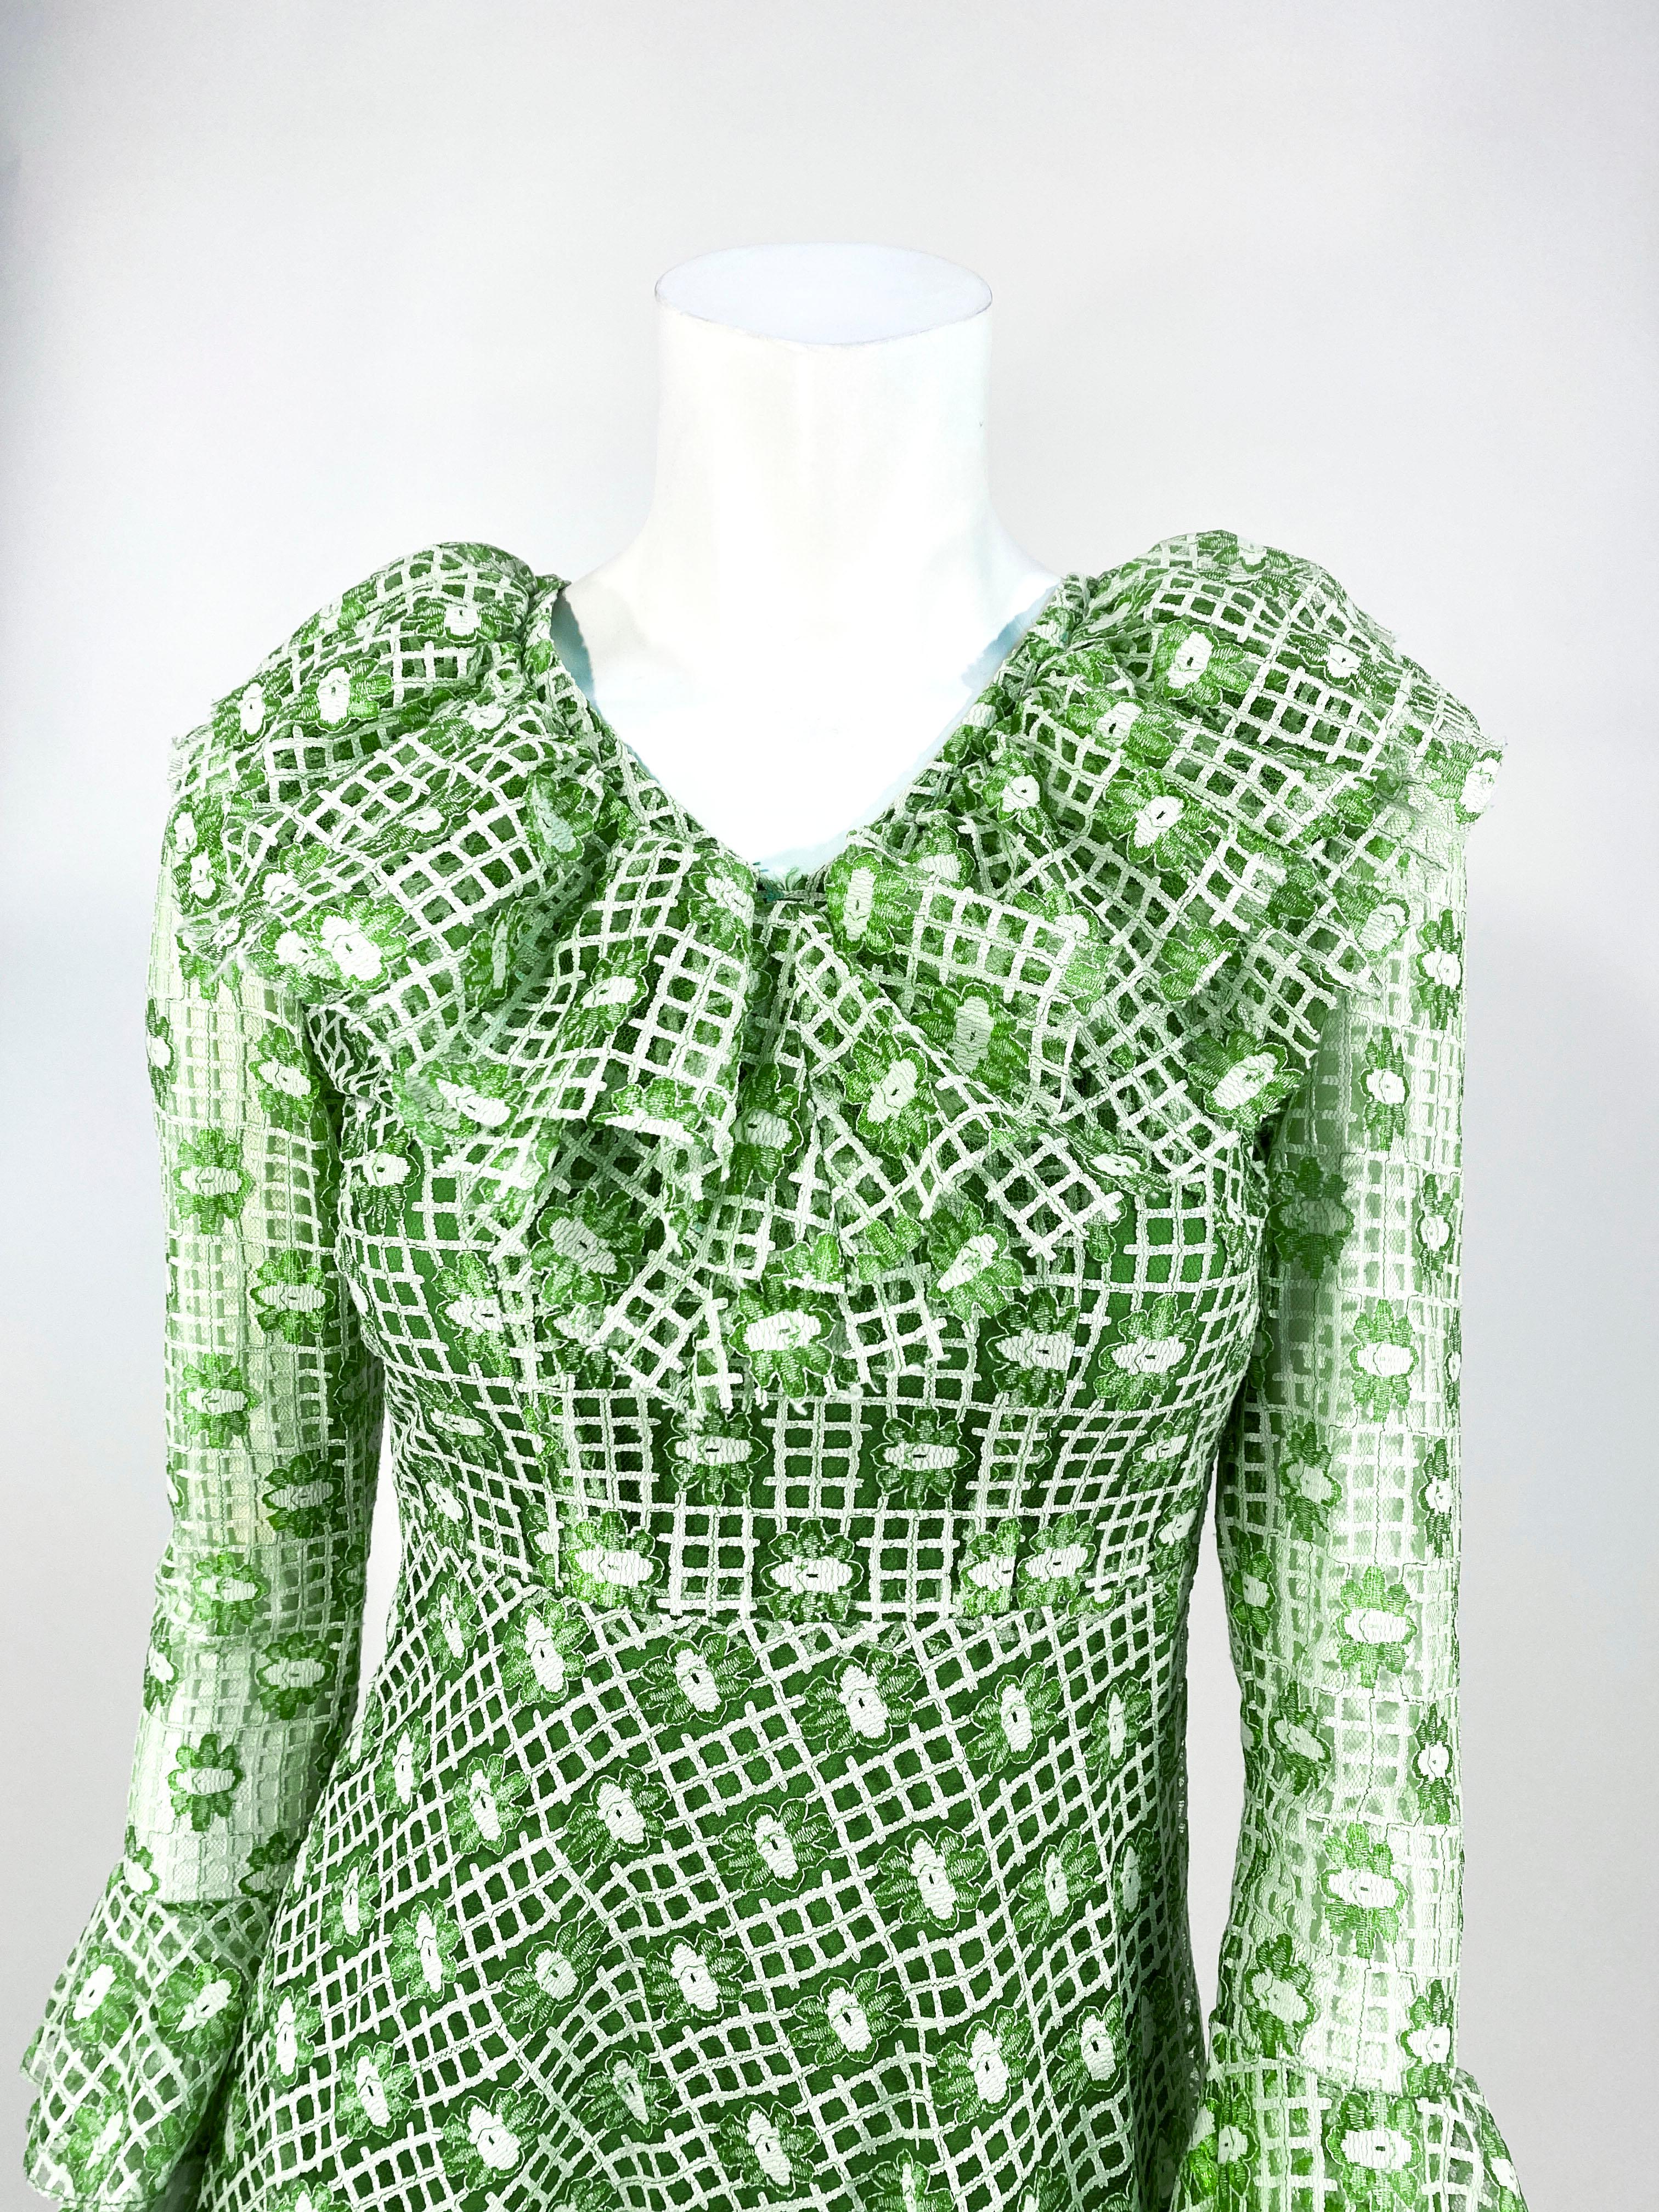 Petit Late 1960s to early 1970s green machine lace and mesh dress featuring a plaid and flower pattern. The body of the dress is fully lined and the sleeves are sheer. The neckline and cuffs are adorned with wide gathered ruffles. The skirt is